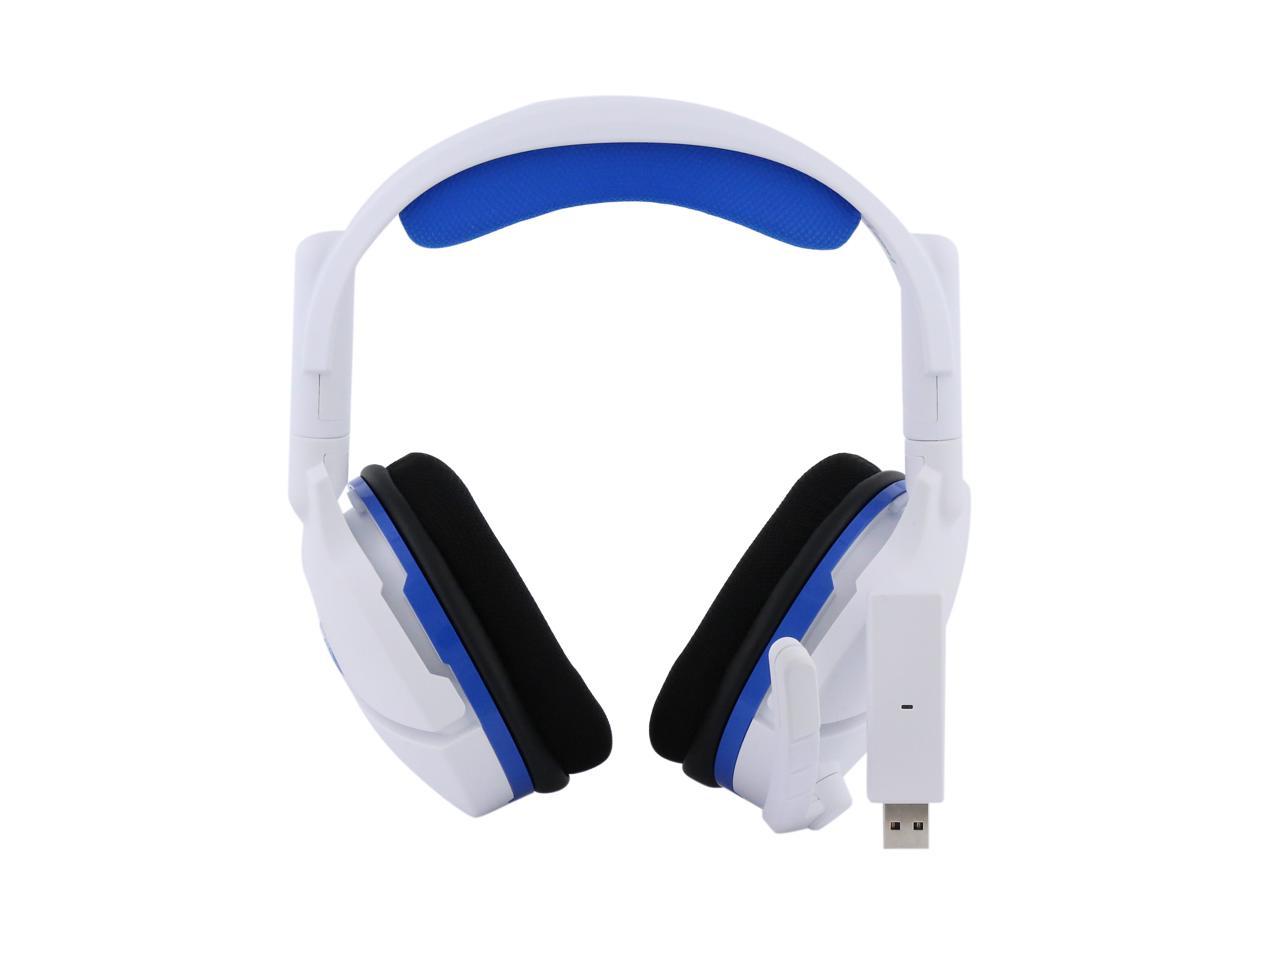 turtle beach stealth 600 white wireless surround sound gaming headset for playstation 4 pro and playstation 4